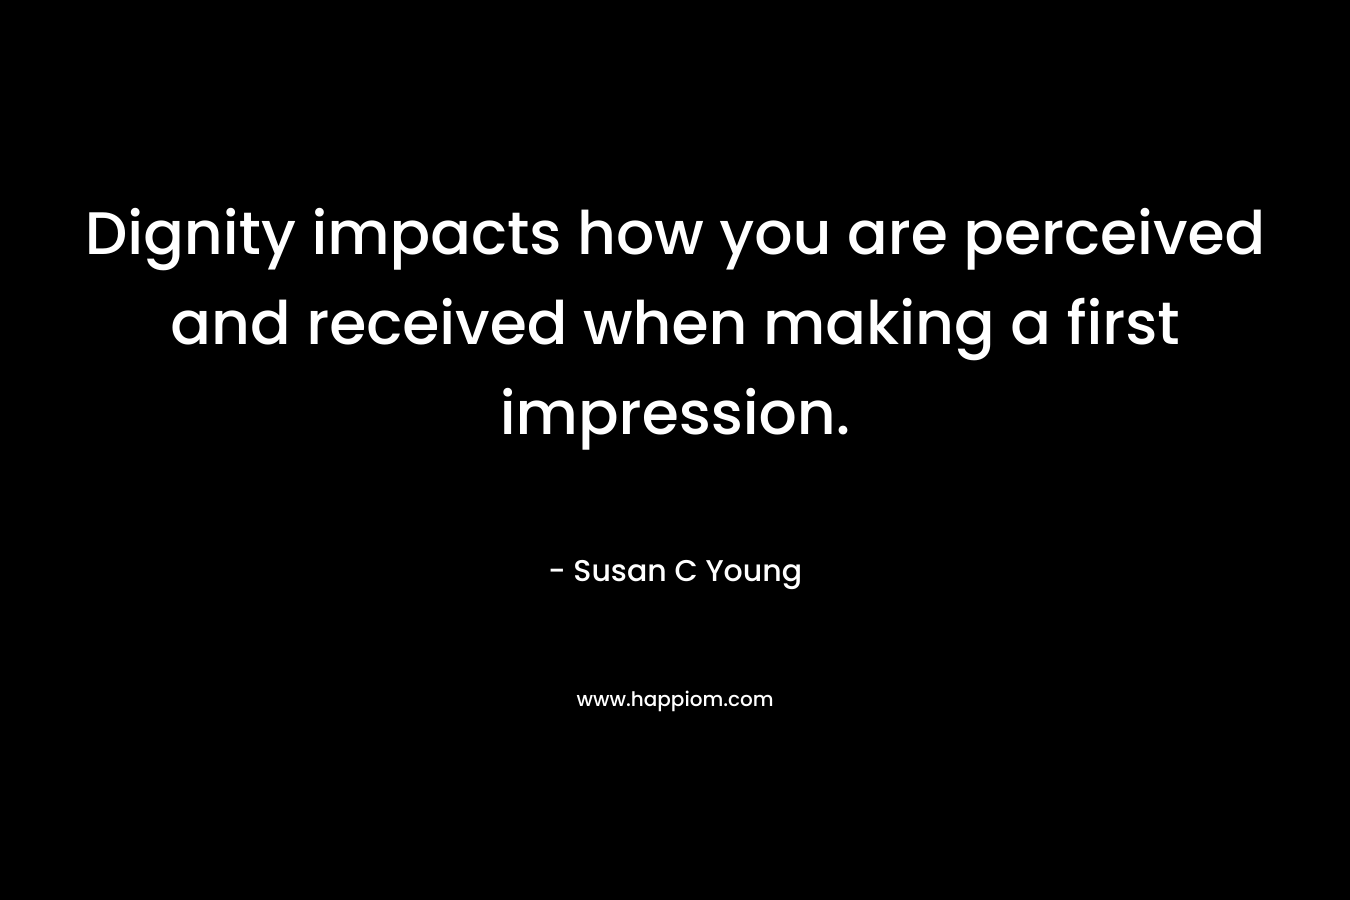 Dignity impacts how you are perceived and received when making a first impression.